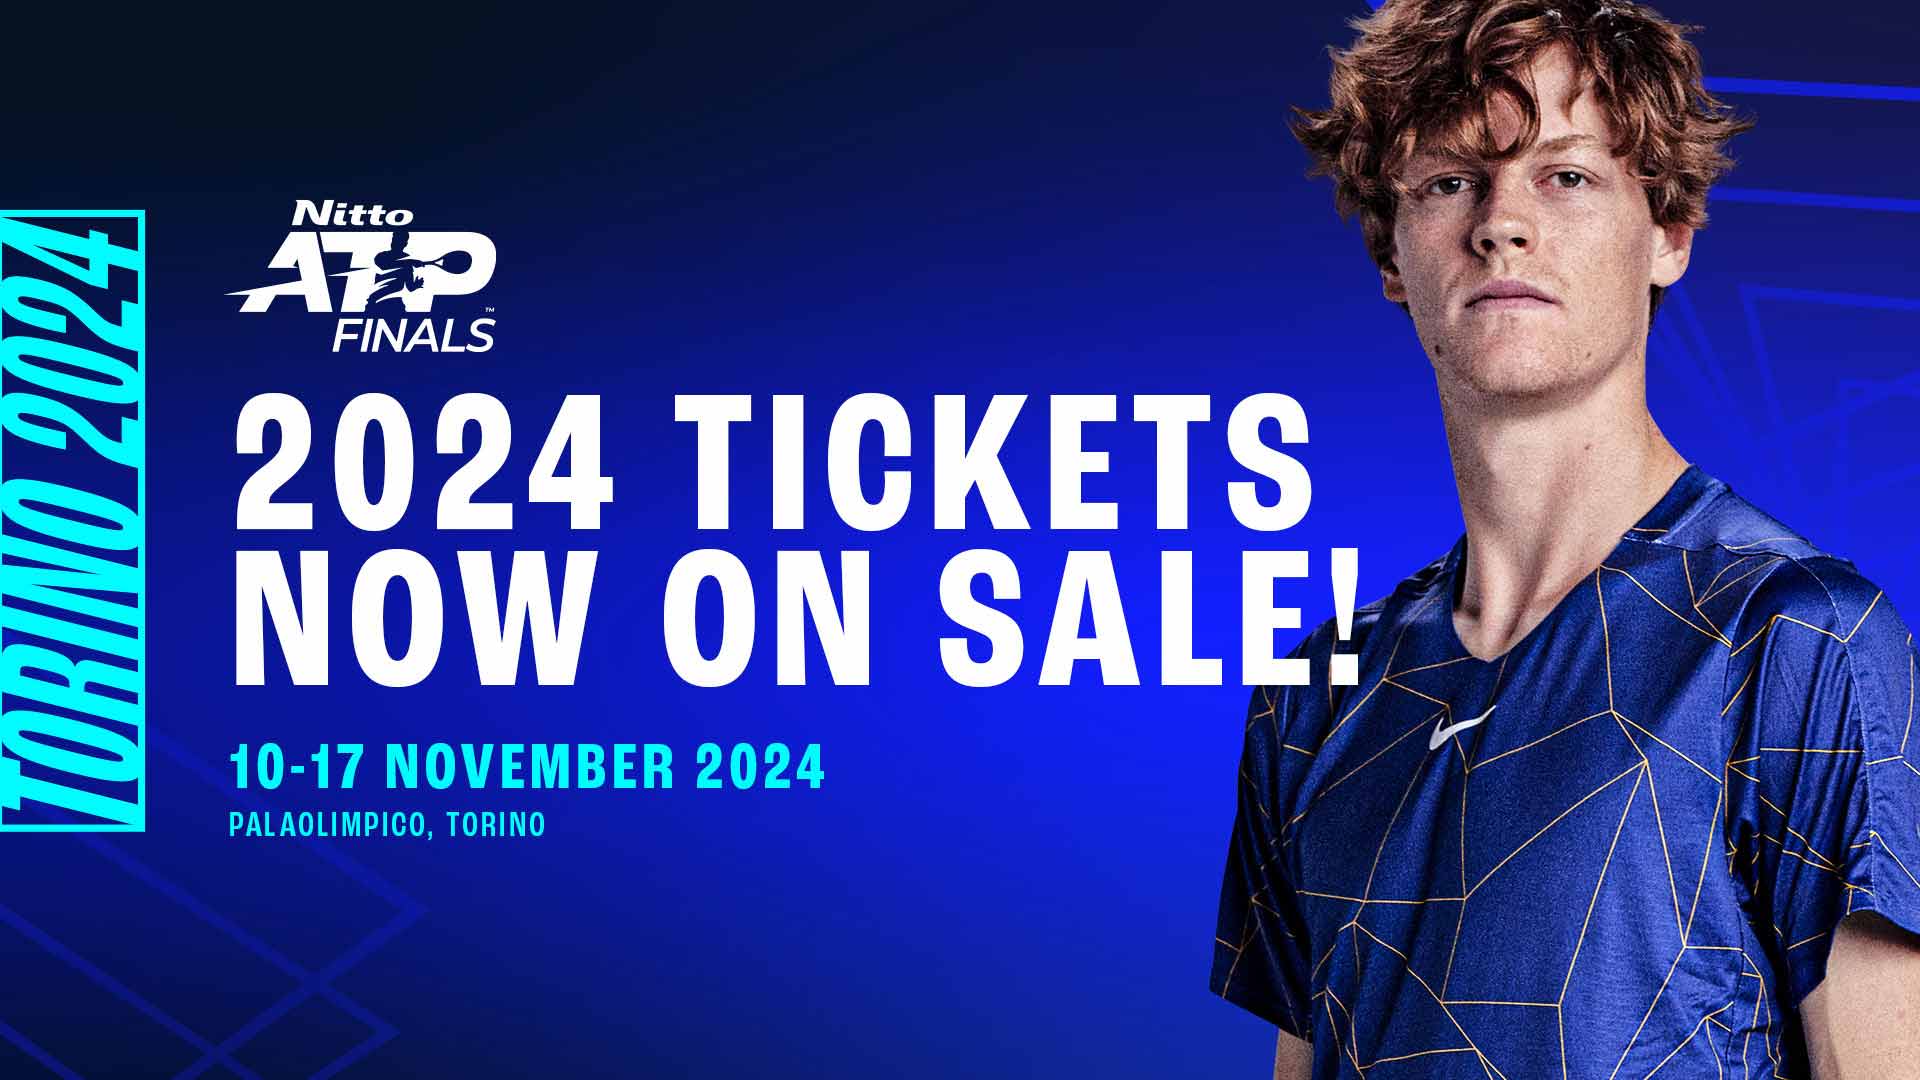 Tickets On Sale For 2024 Nitto ATP Finals